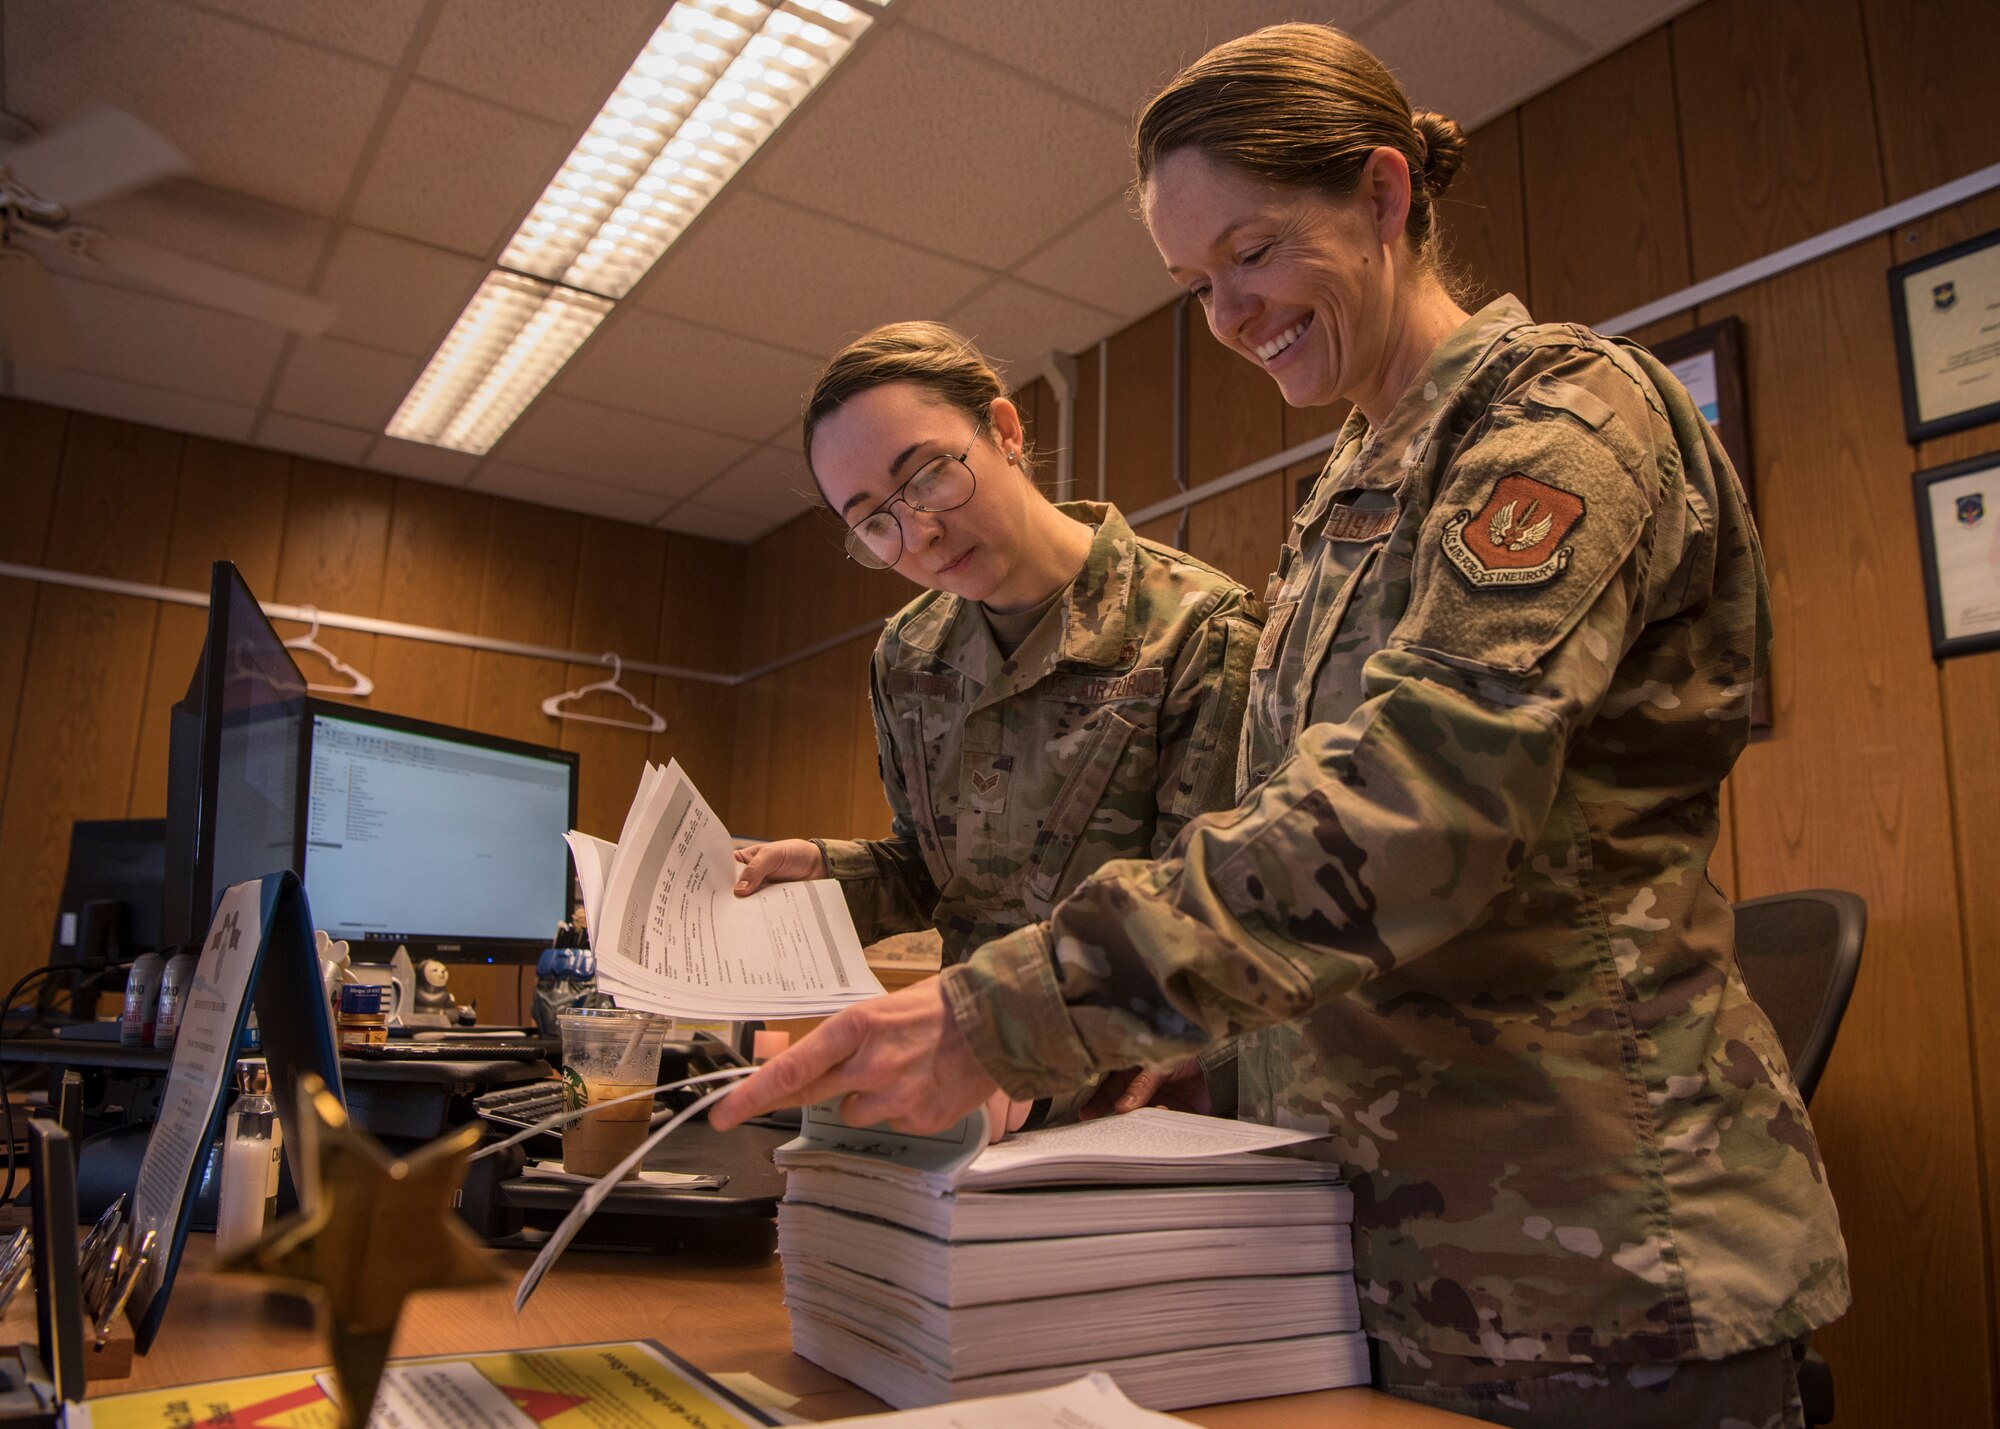 U.S. Air Force Tech. Sgt. Amber Coronado, 86th Airlift Wing Judge Advocate noncommissioned officer in charge of adverse actions, right, and Senior Airman Katrina Walter, 86th AW JA military justice paralegal, look through documents at Ramstein Air Base, Germany, Aug 4, 2020.